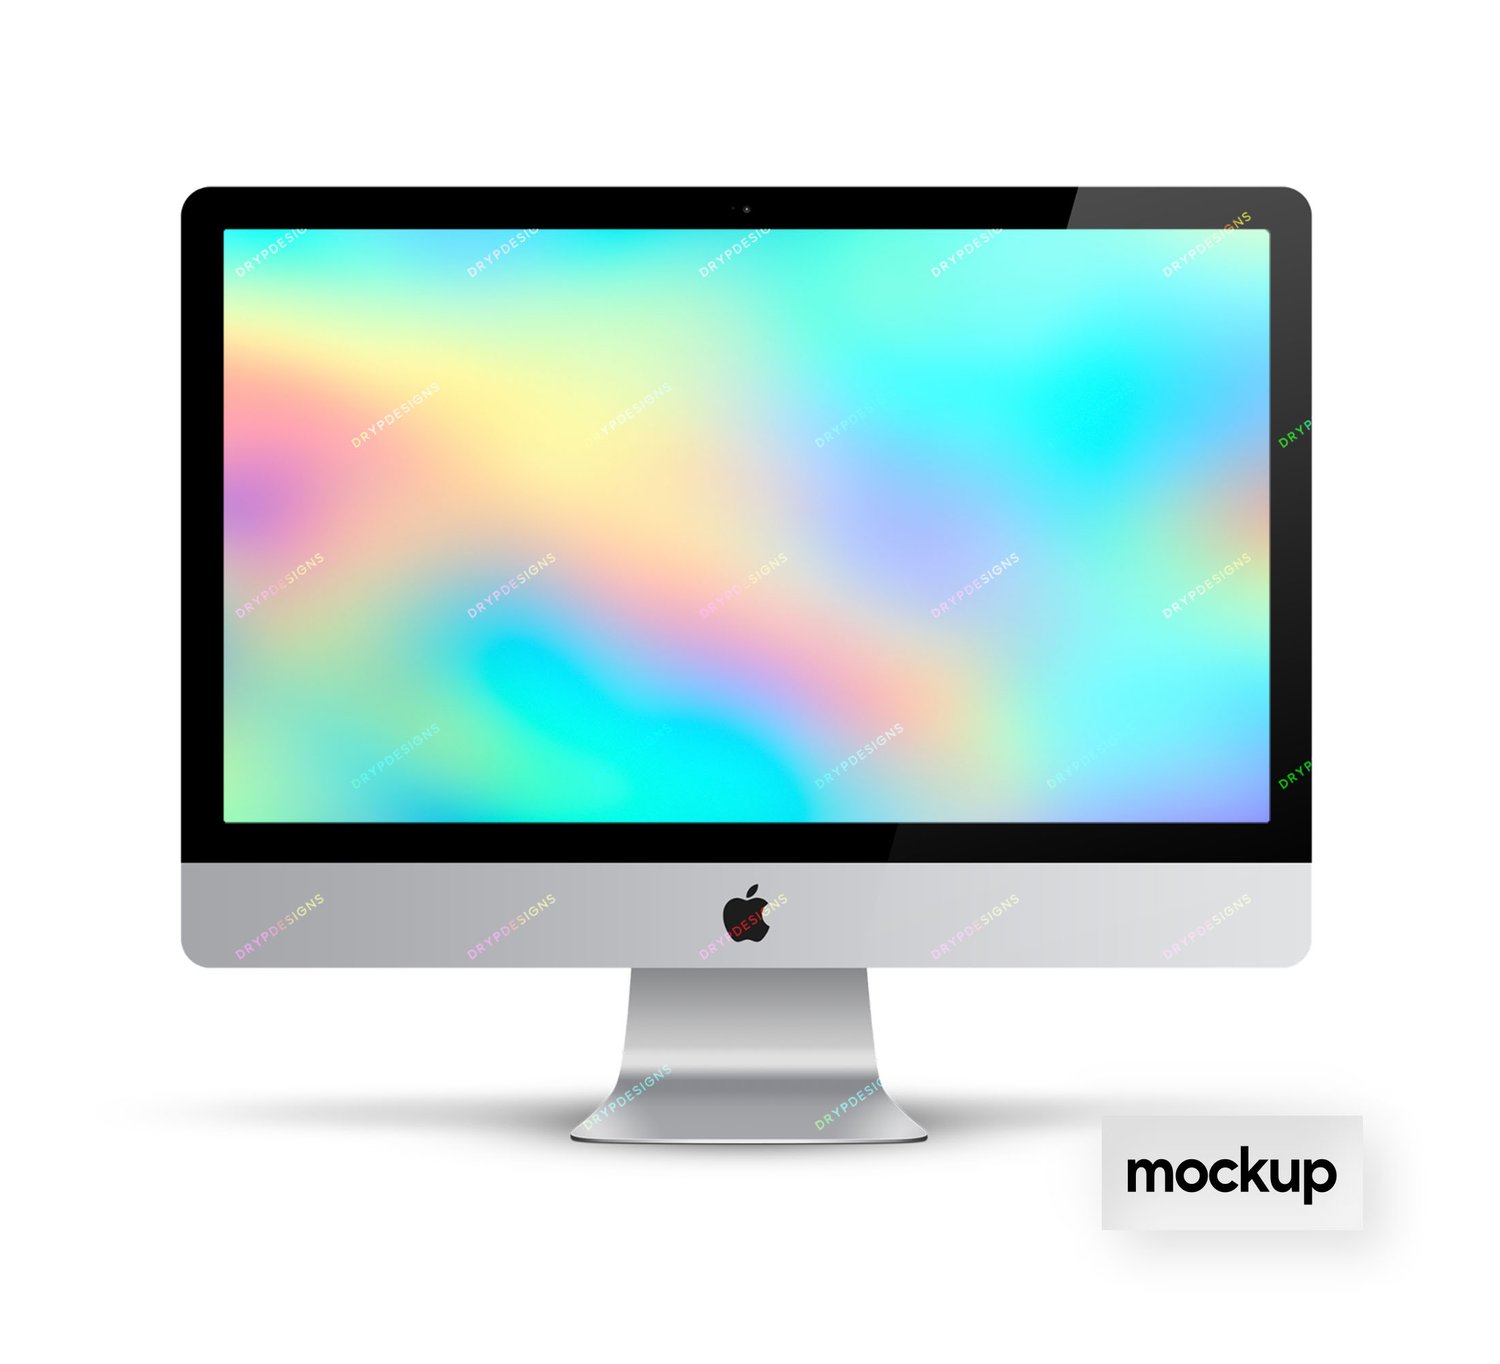 Holographic Pastel Blur Digital Paper Background — drypdesigns